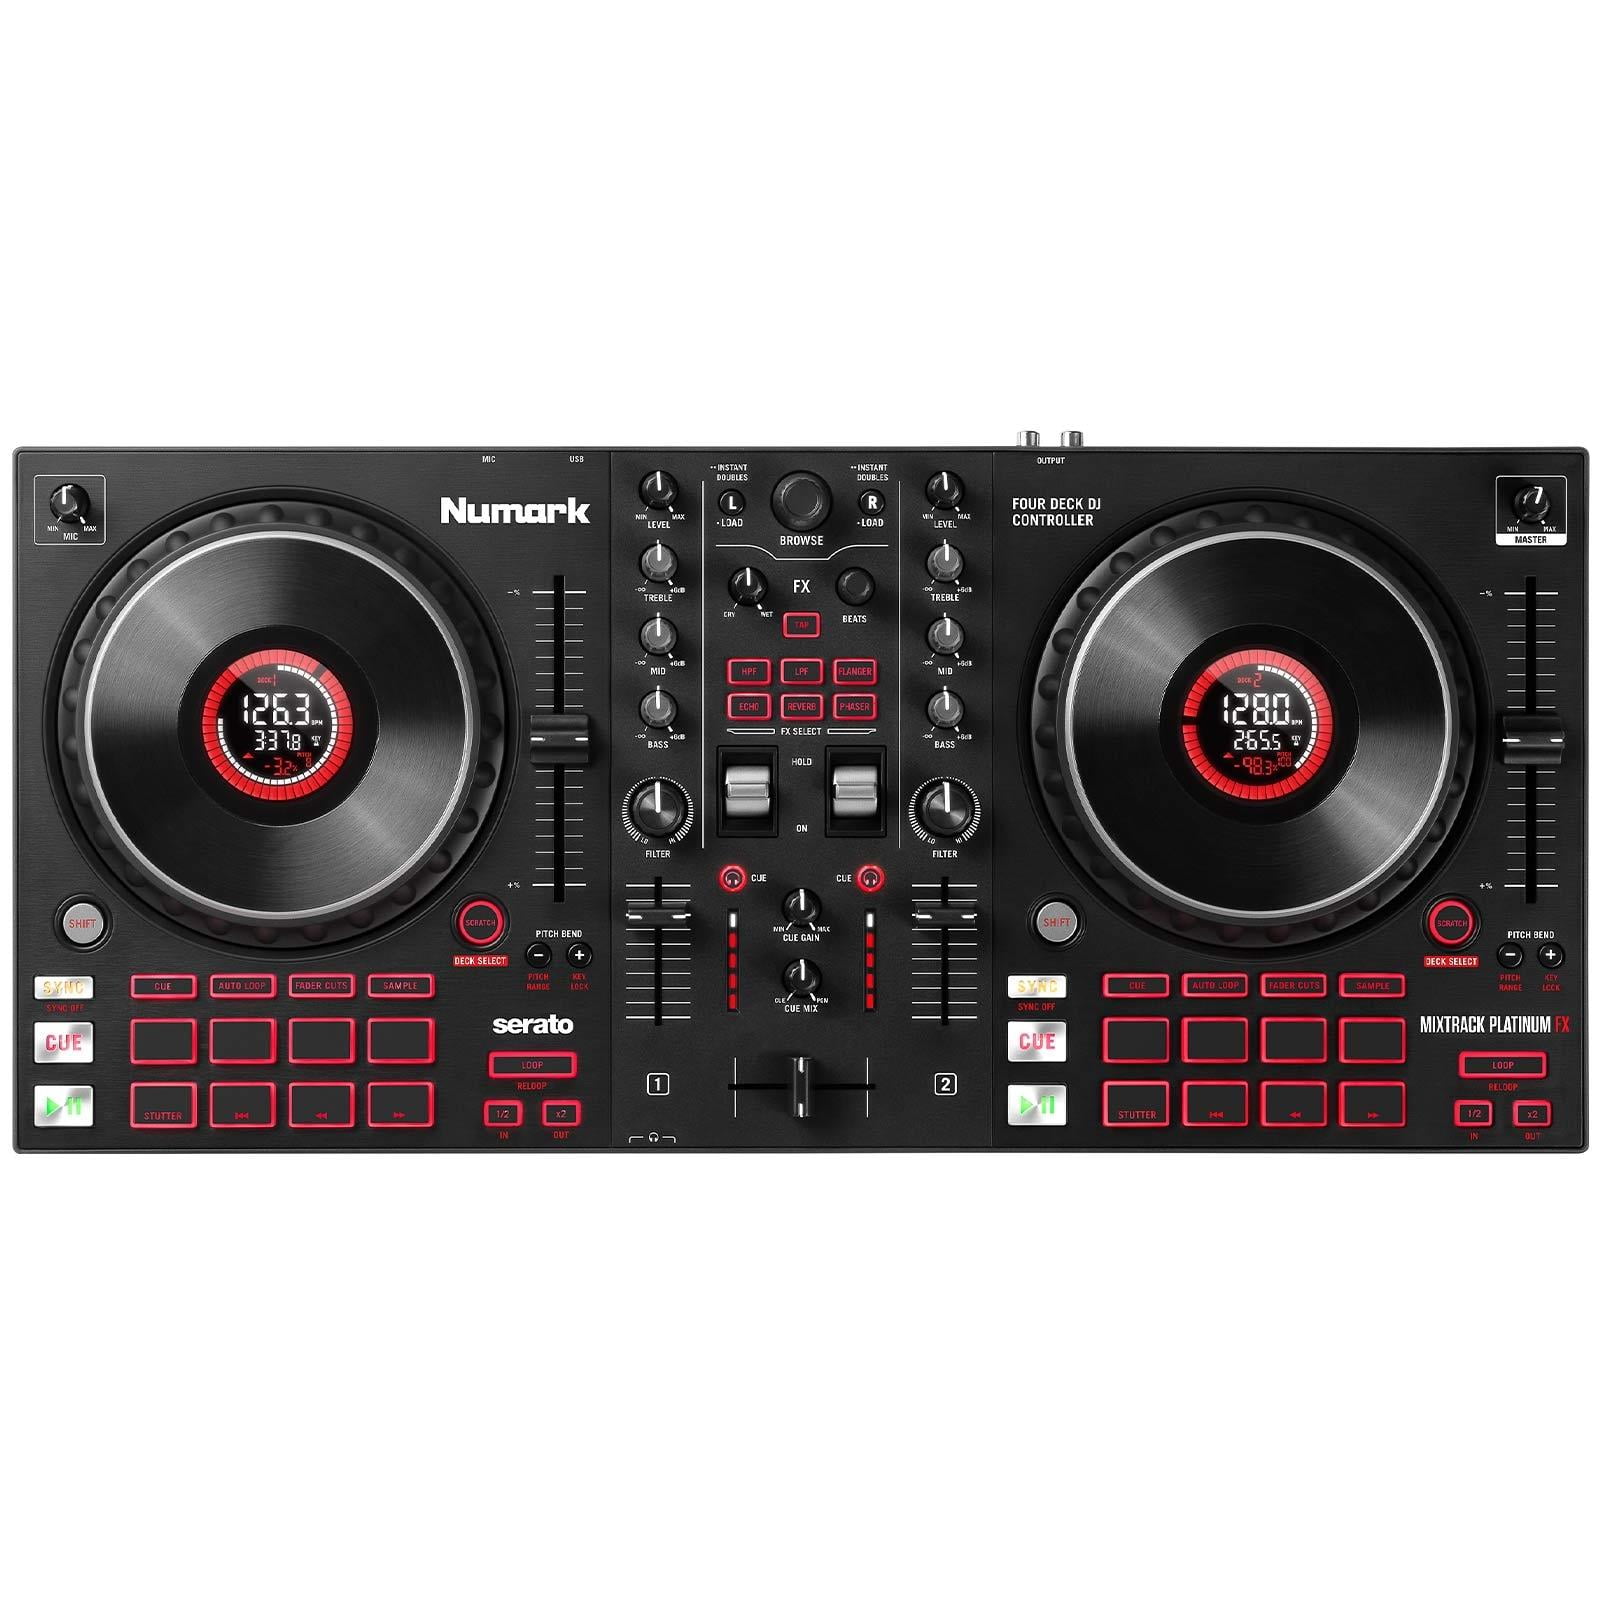 Numark Mixtrack Platinum FX - DJ Controller for Serato with 4 Deck Control,  Mixer, Built-in Audio Interface, Jog Wheel Displays and Paddles